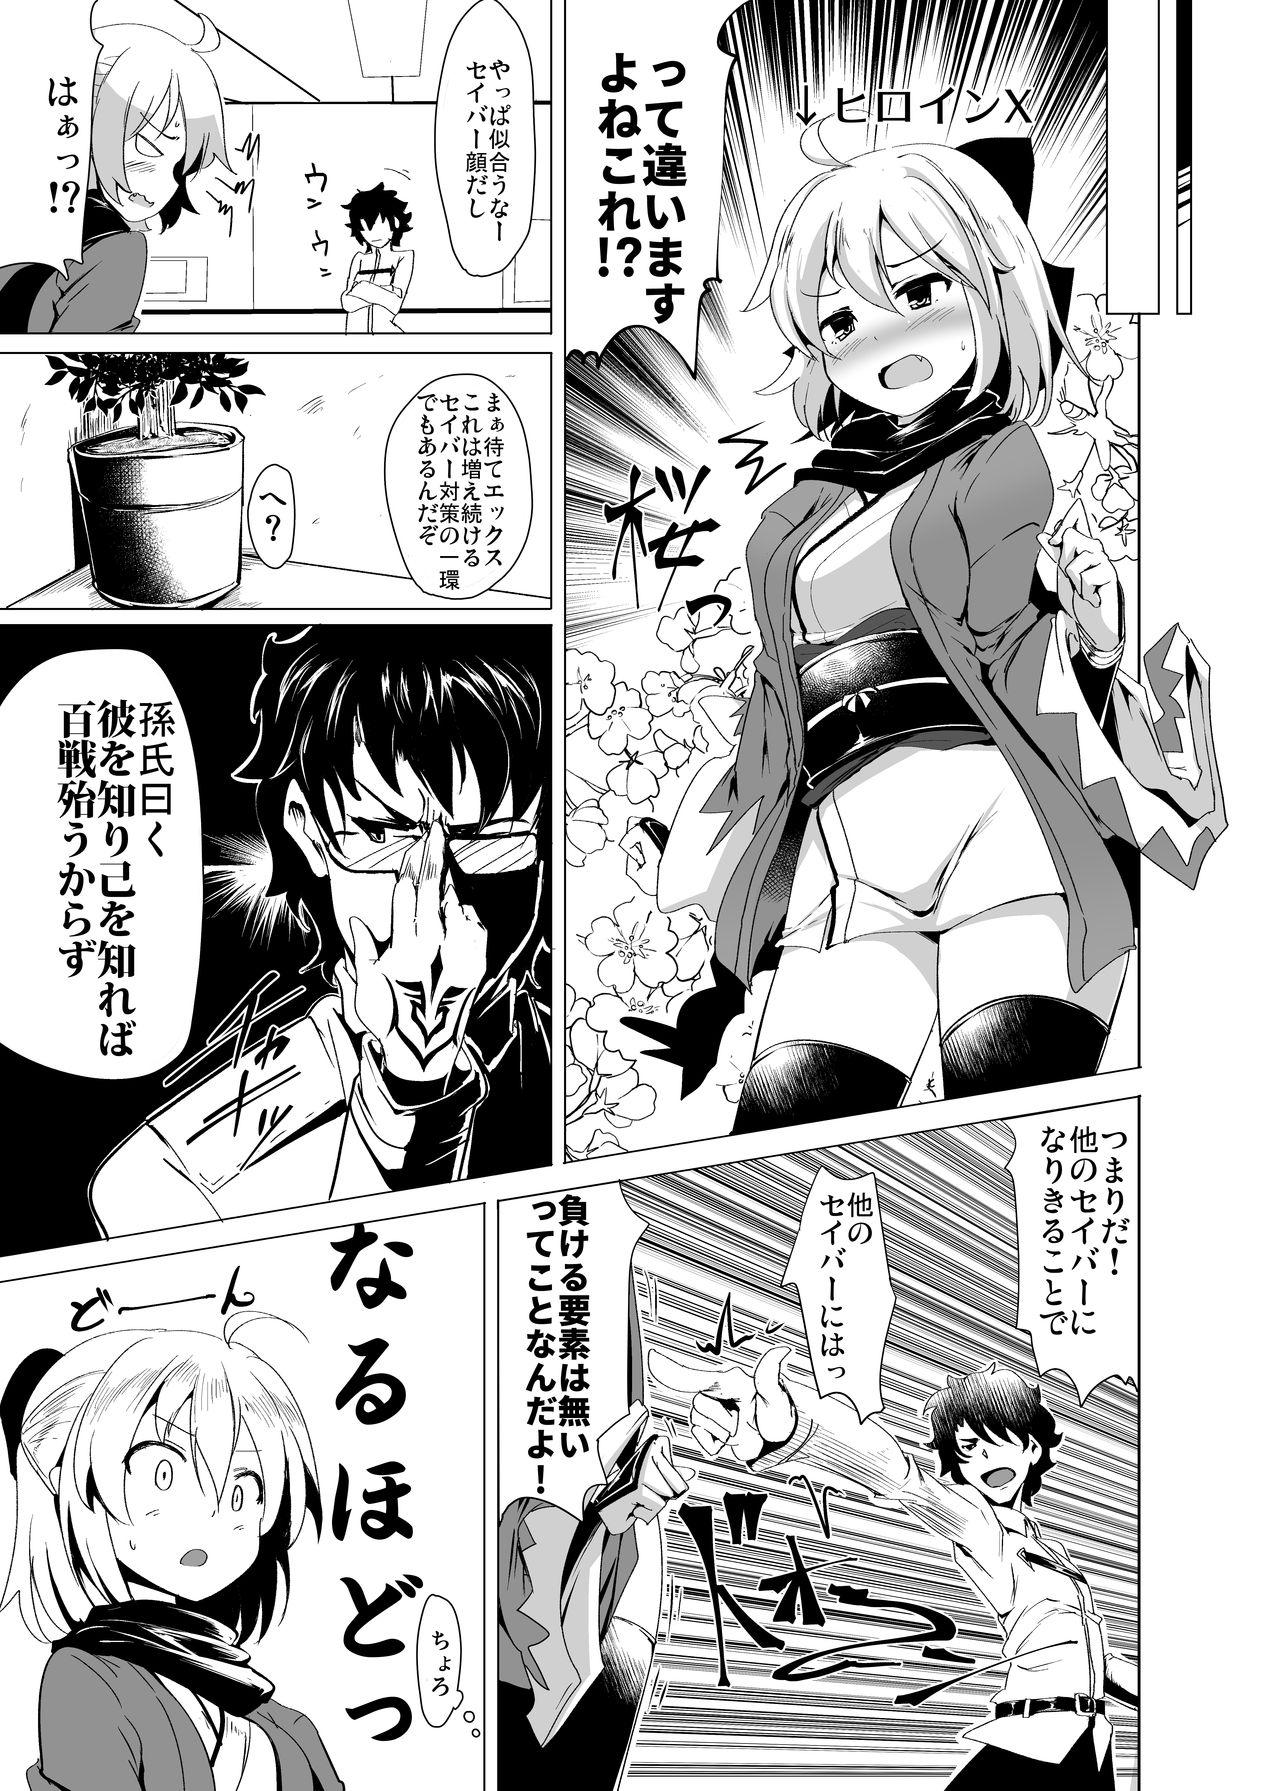 Adult Toys Heroine X to Heroine Sex!! - Fate grand order Rubia - Page 8